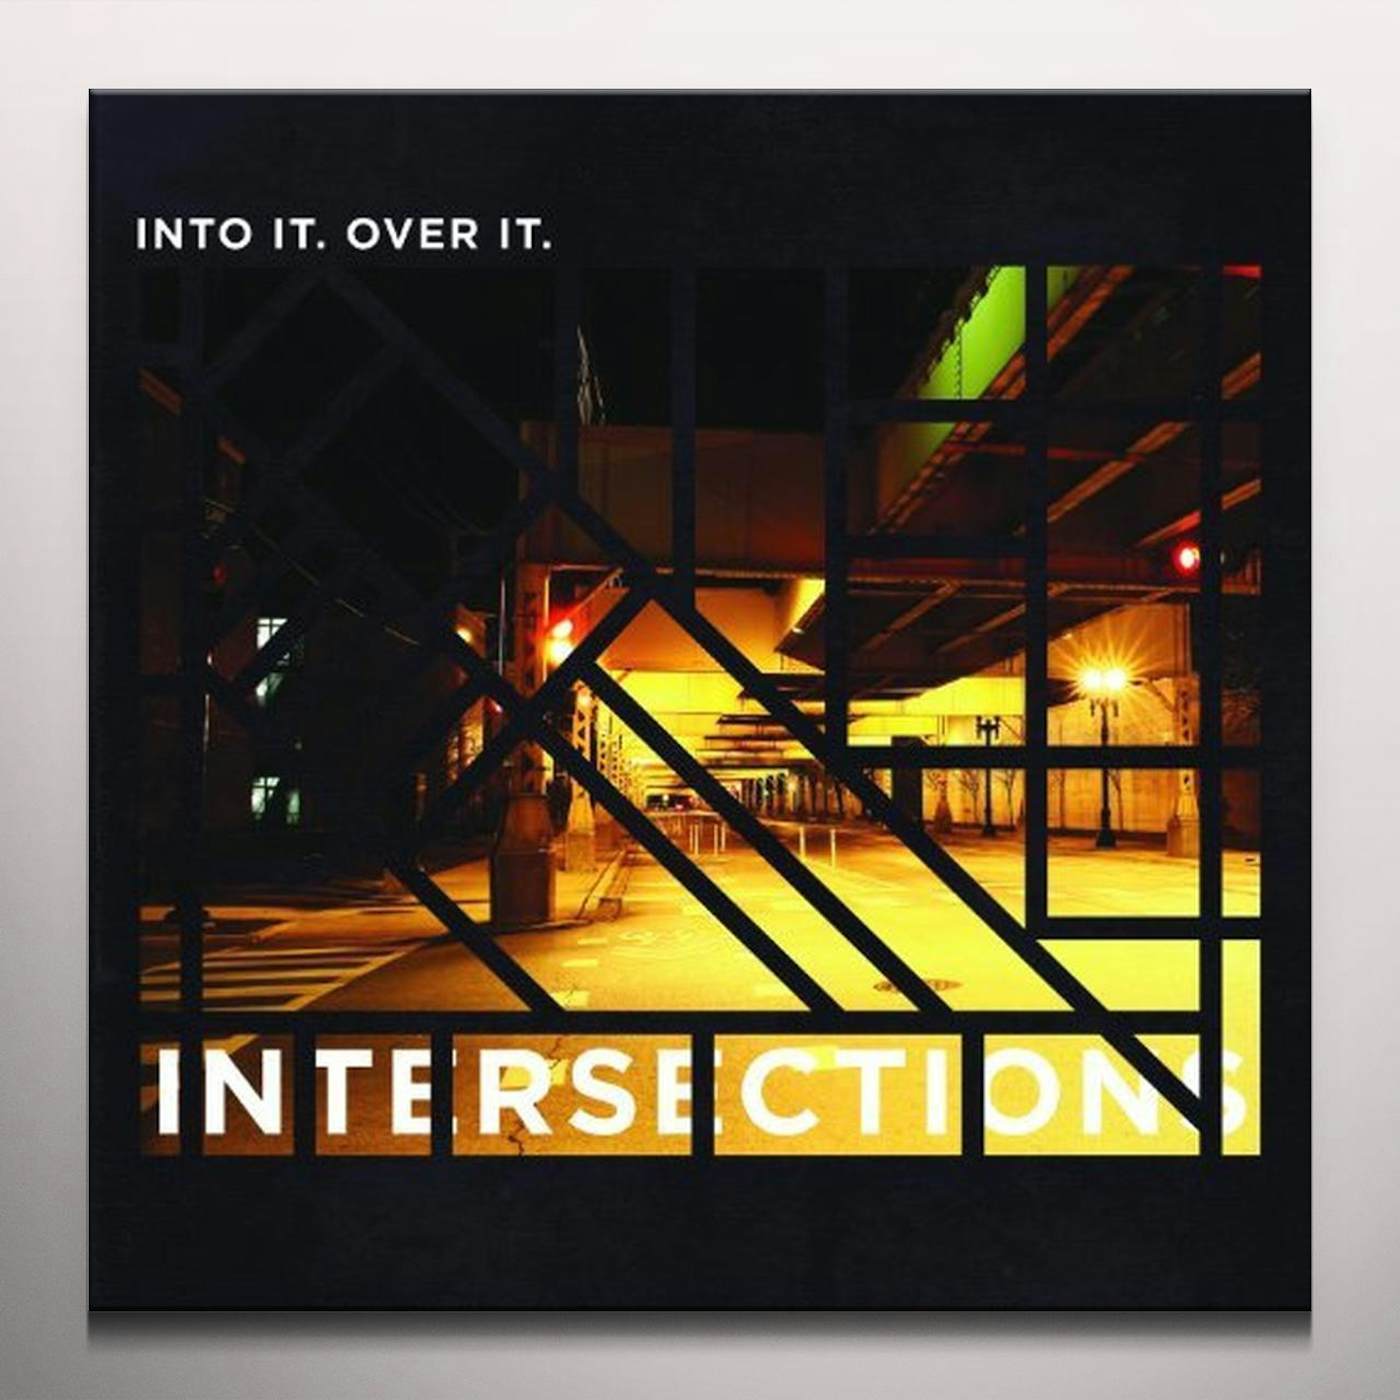 Into It. Over It. Intersections Vinyl Record